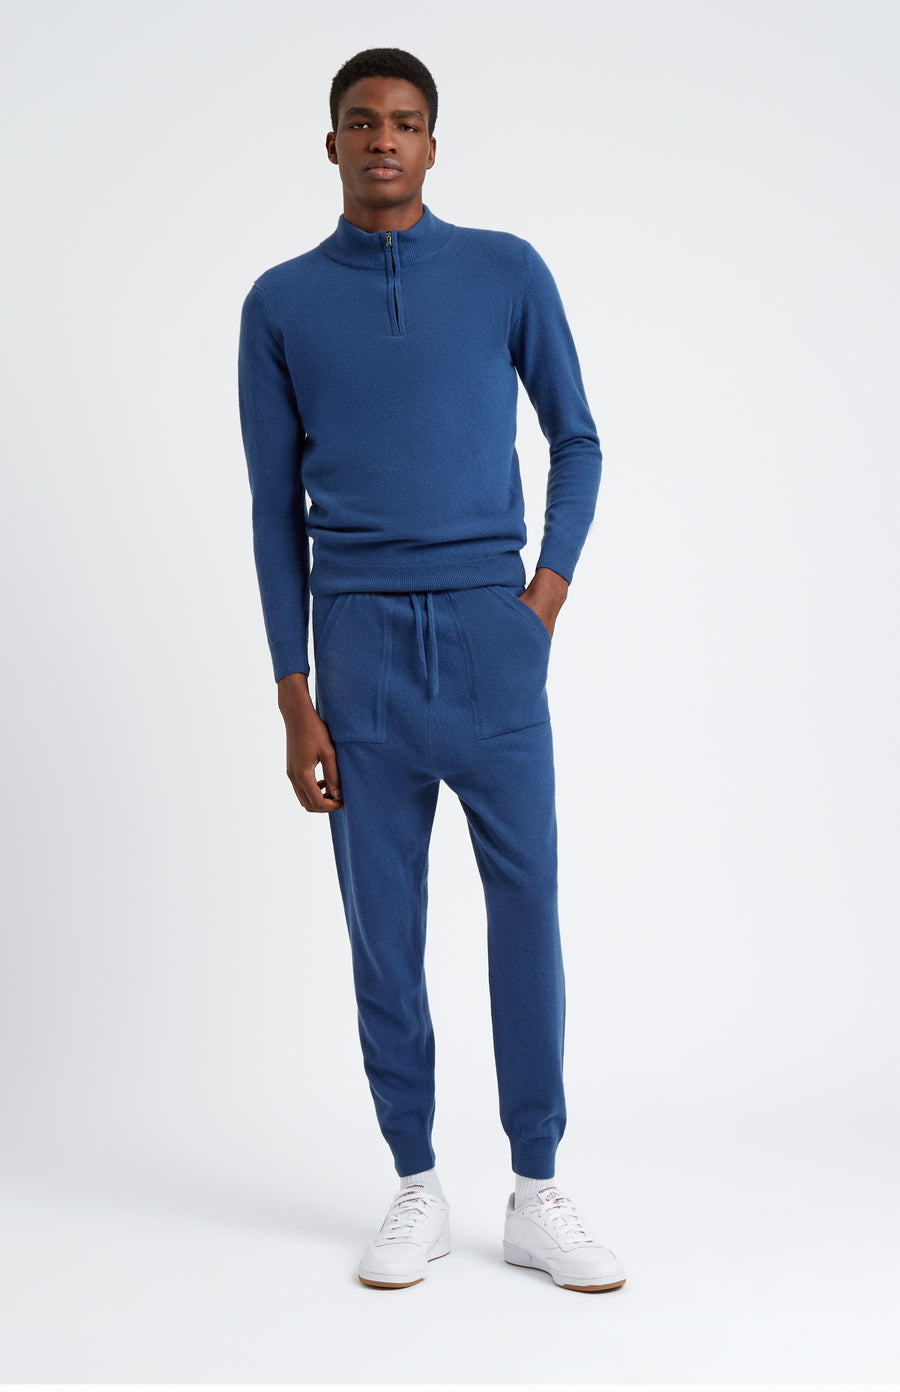 Pringle of Scotland Men's Knitted Merino Cashmere Joggers In Deep Indigo with matching jumper